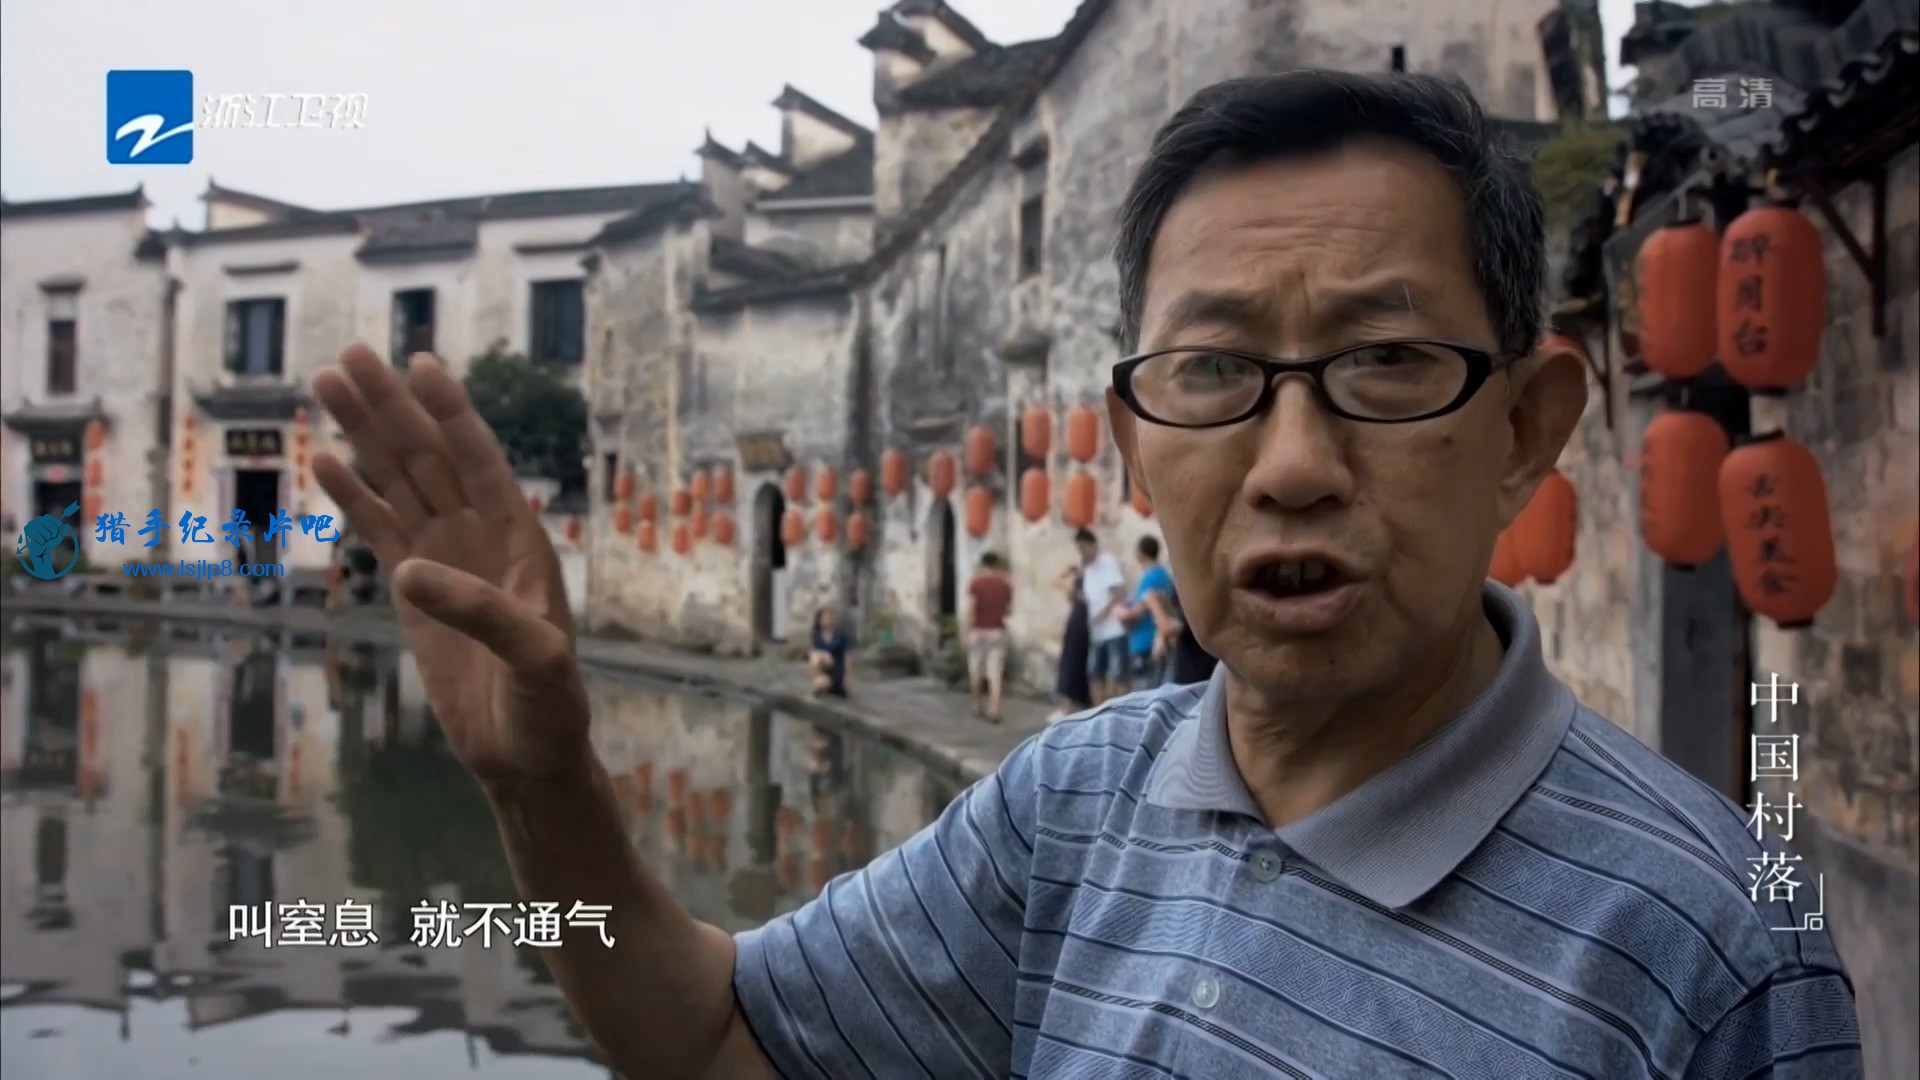 ZJTV-HD,Villages.in.China.EP02.HDTV.1080i.H264.AAC.ts_20190920_082511.123.jpg